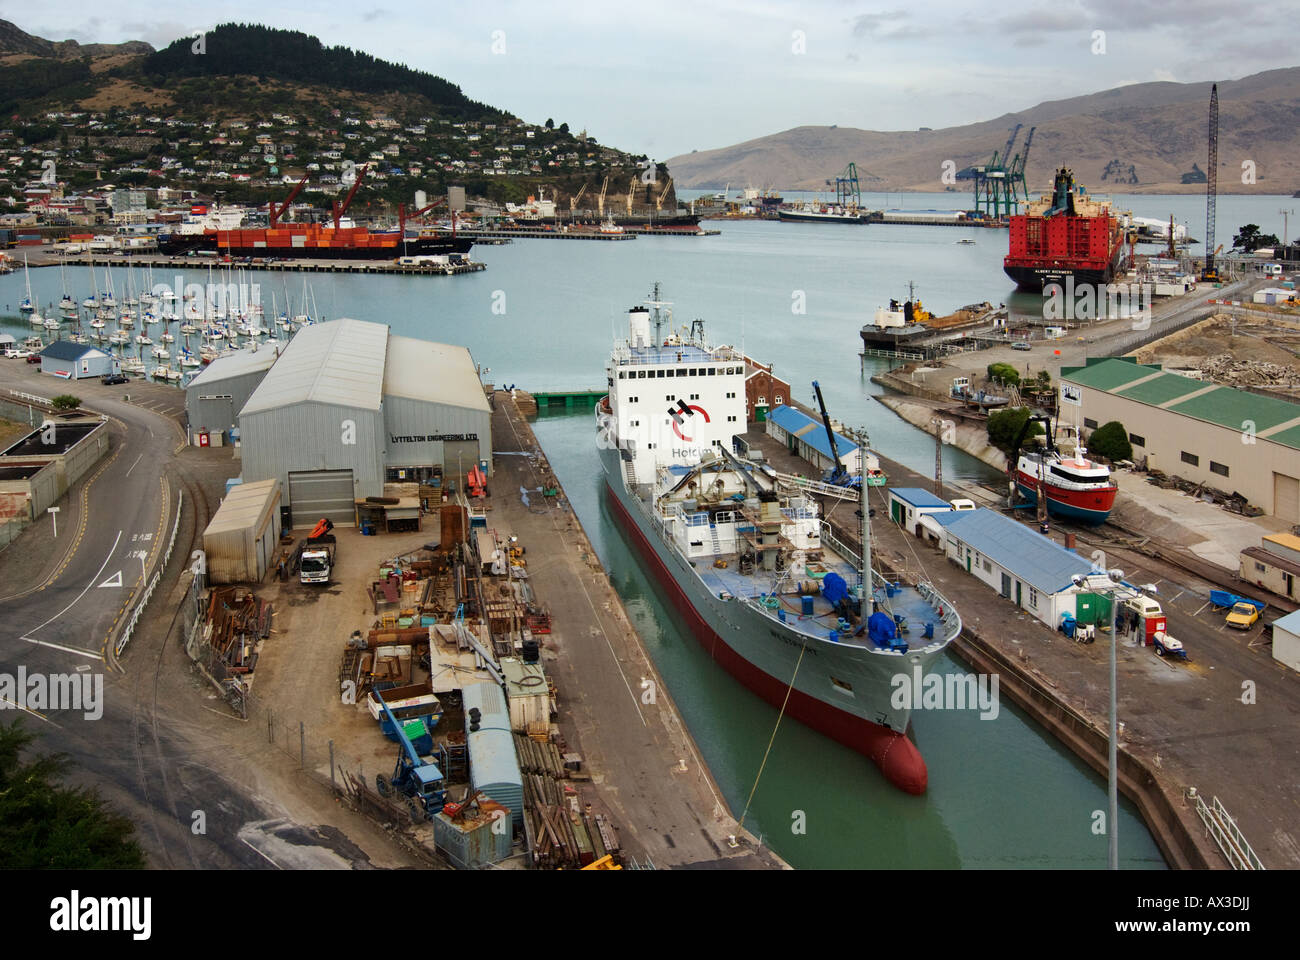 A local cement carrier about to leave the drydock at Lyttelton, New Zealand in this view of the inner harbour. Stock Photo